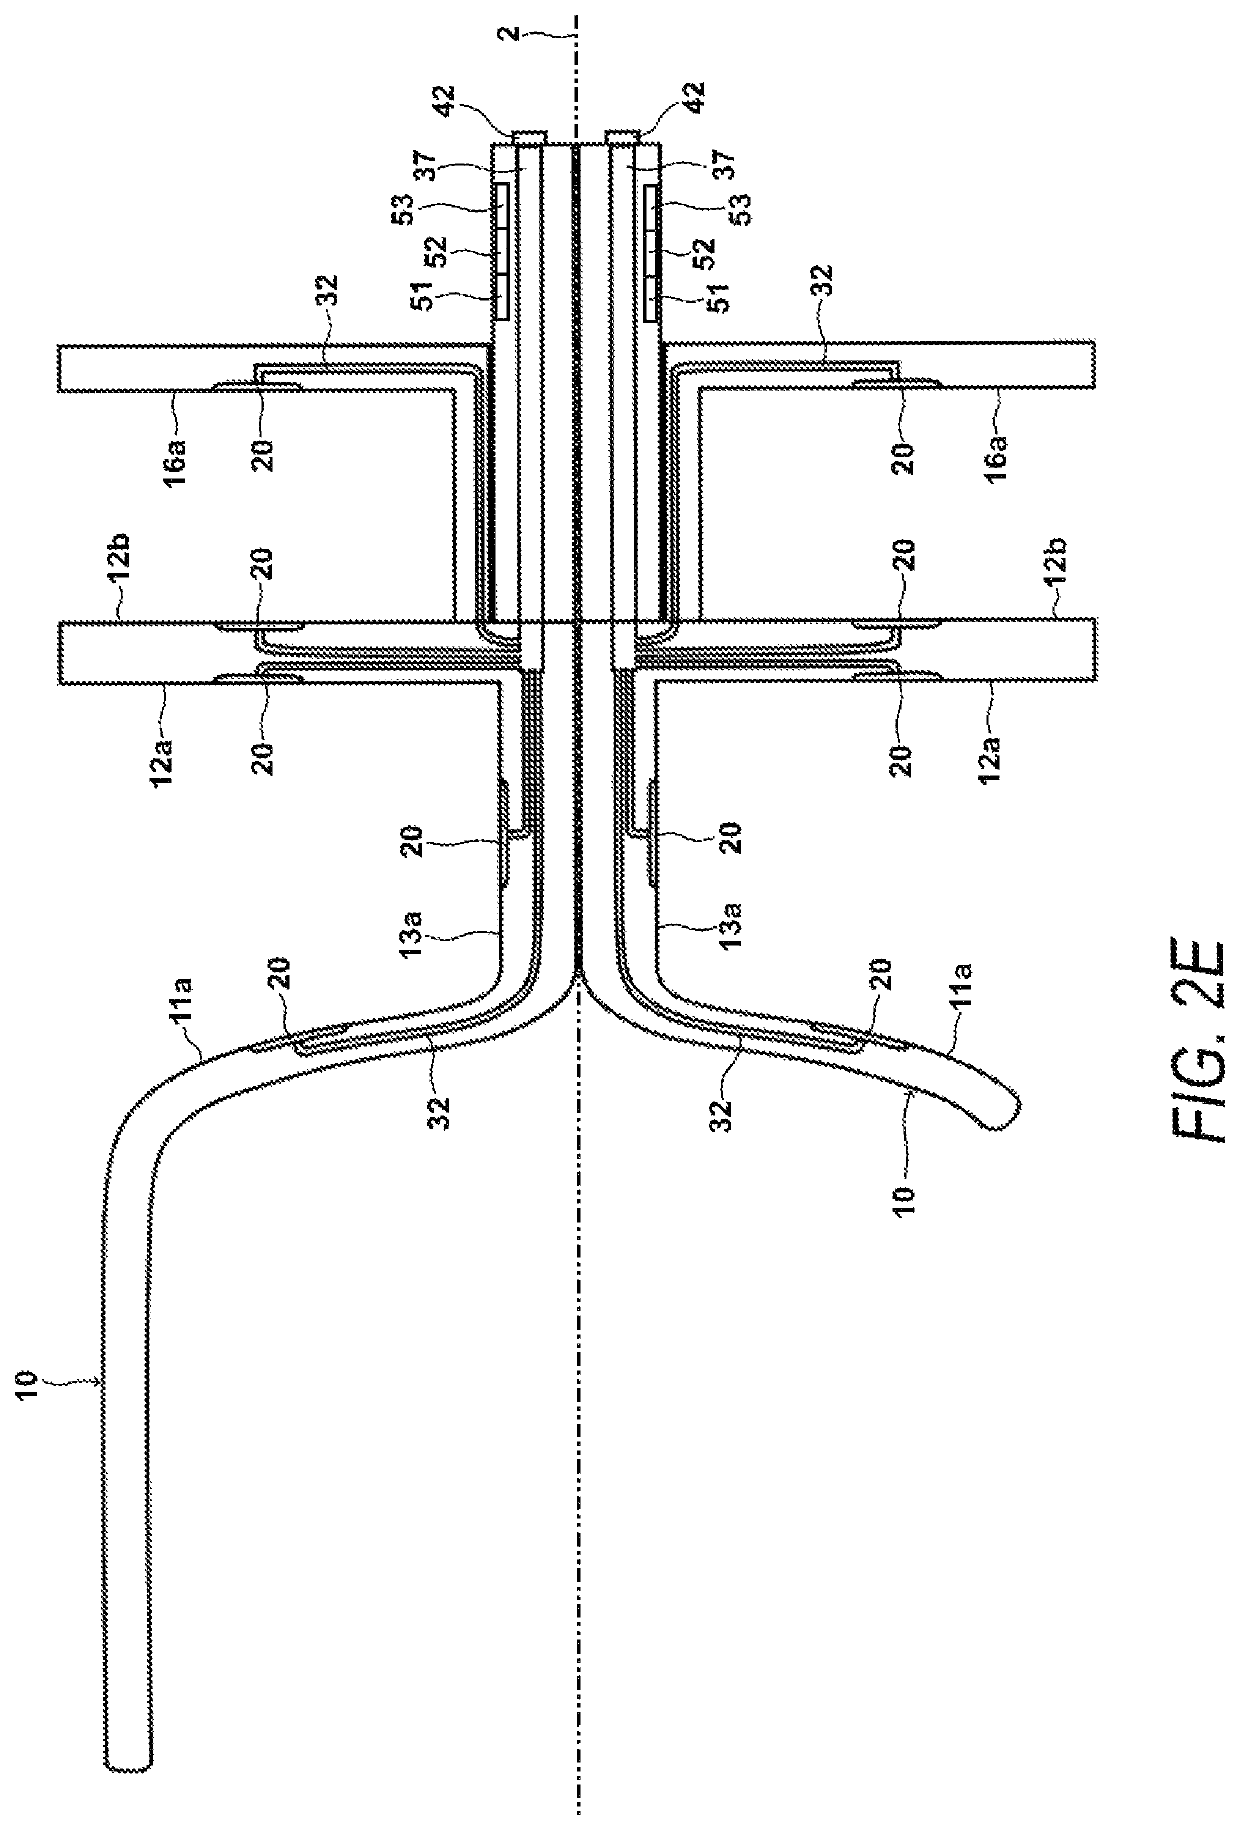 Three-dimensional oral imaging system and method